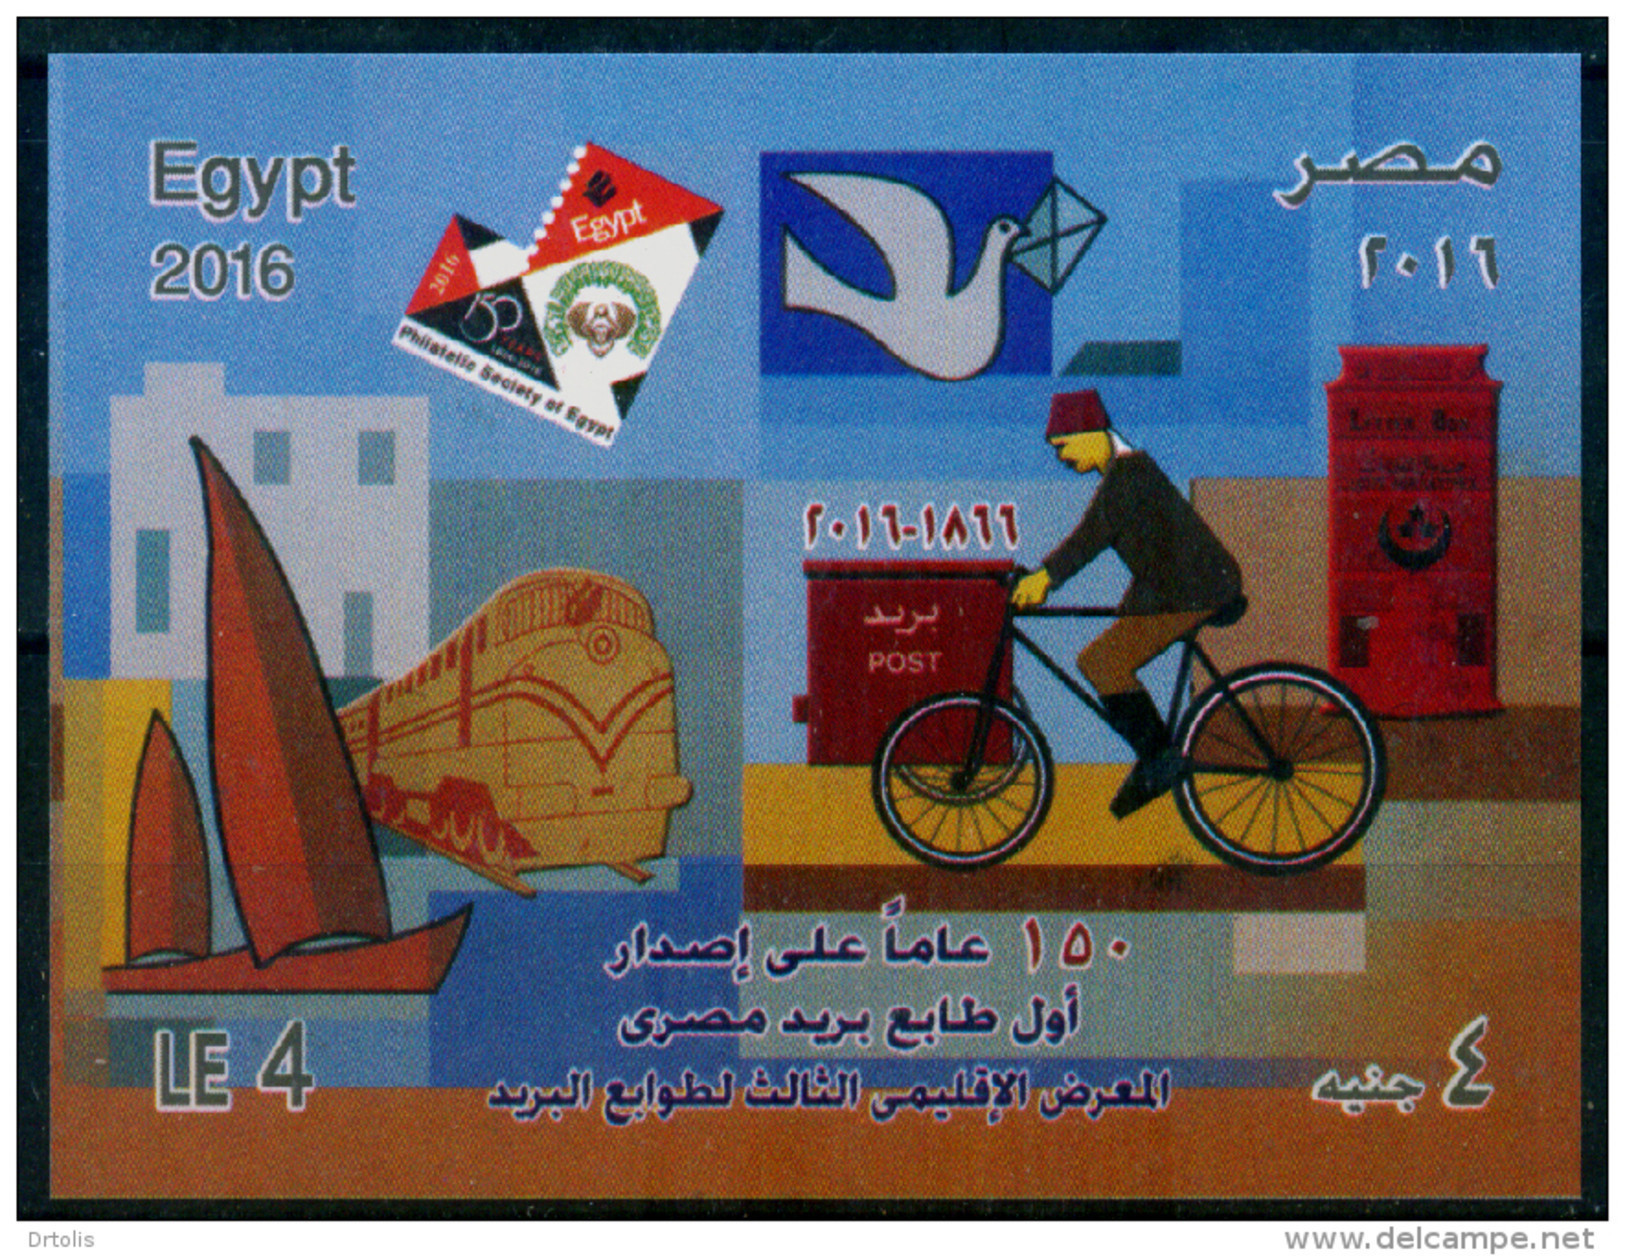 EGYPT / 2016 / POST DAY / 1ST EGYPT STAMP : 150 YEARS / BICYCLE / LETTER BOX / DIESEL TRAIN / DHOWS / MNH / VF - Ongebruikt